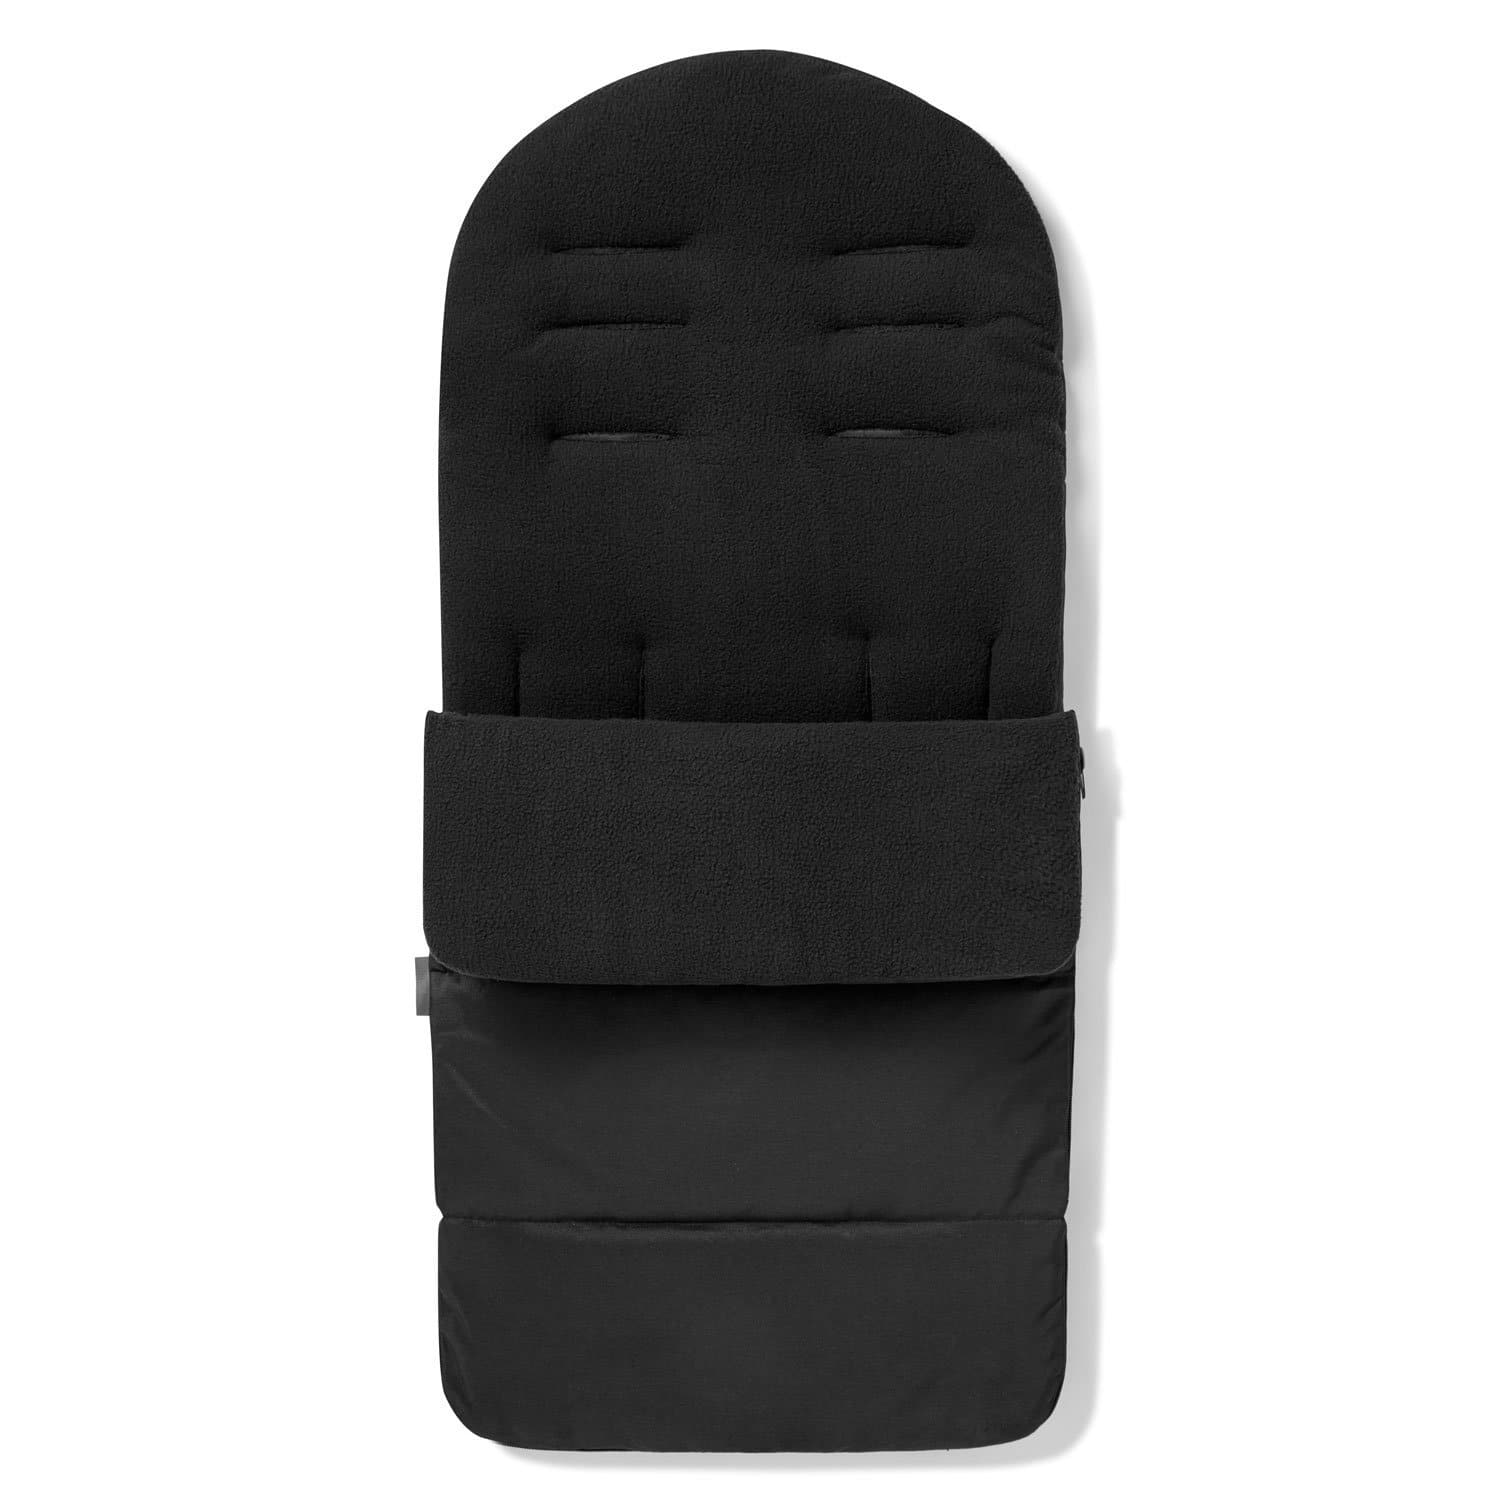 Premium Footmuff / Cosy Toes Compatible with My Child - Black Jack / Fits All Models | For Your Little One